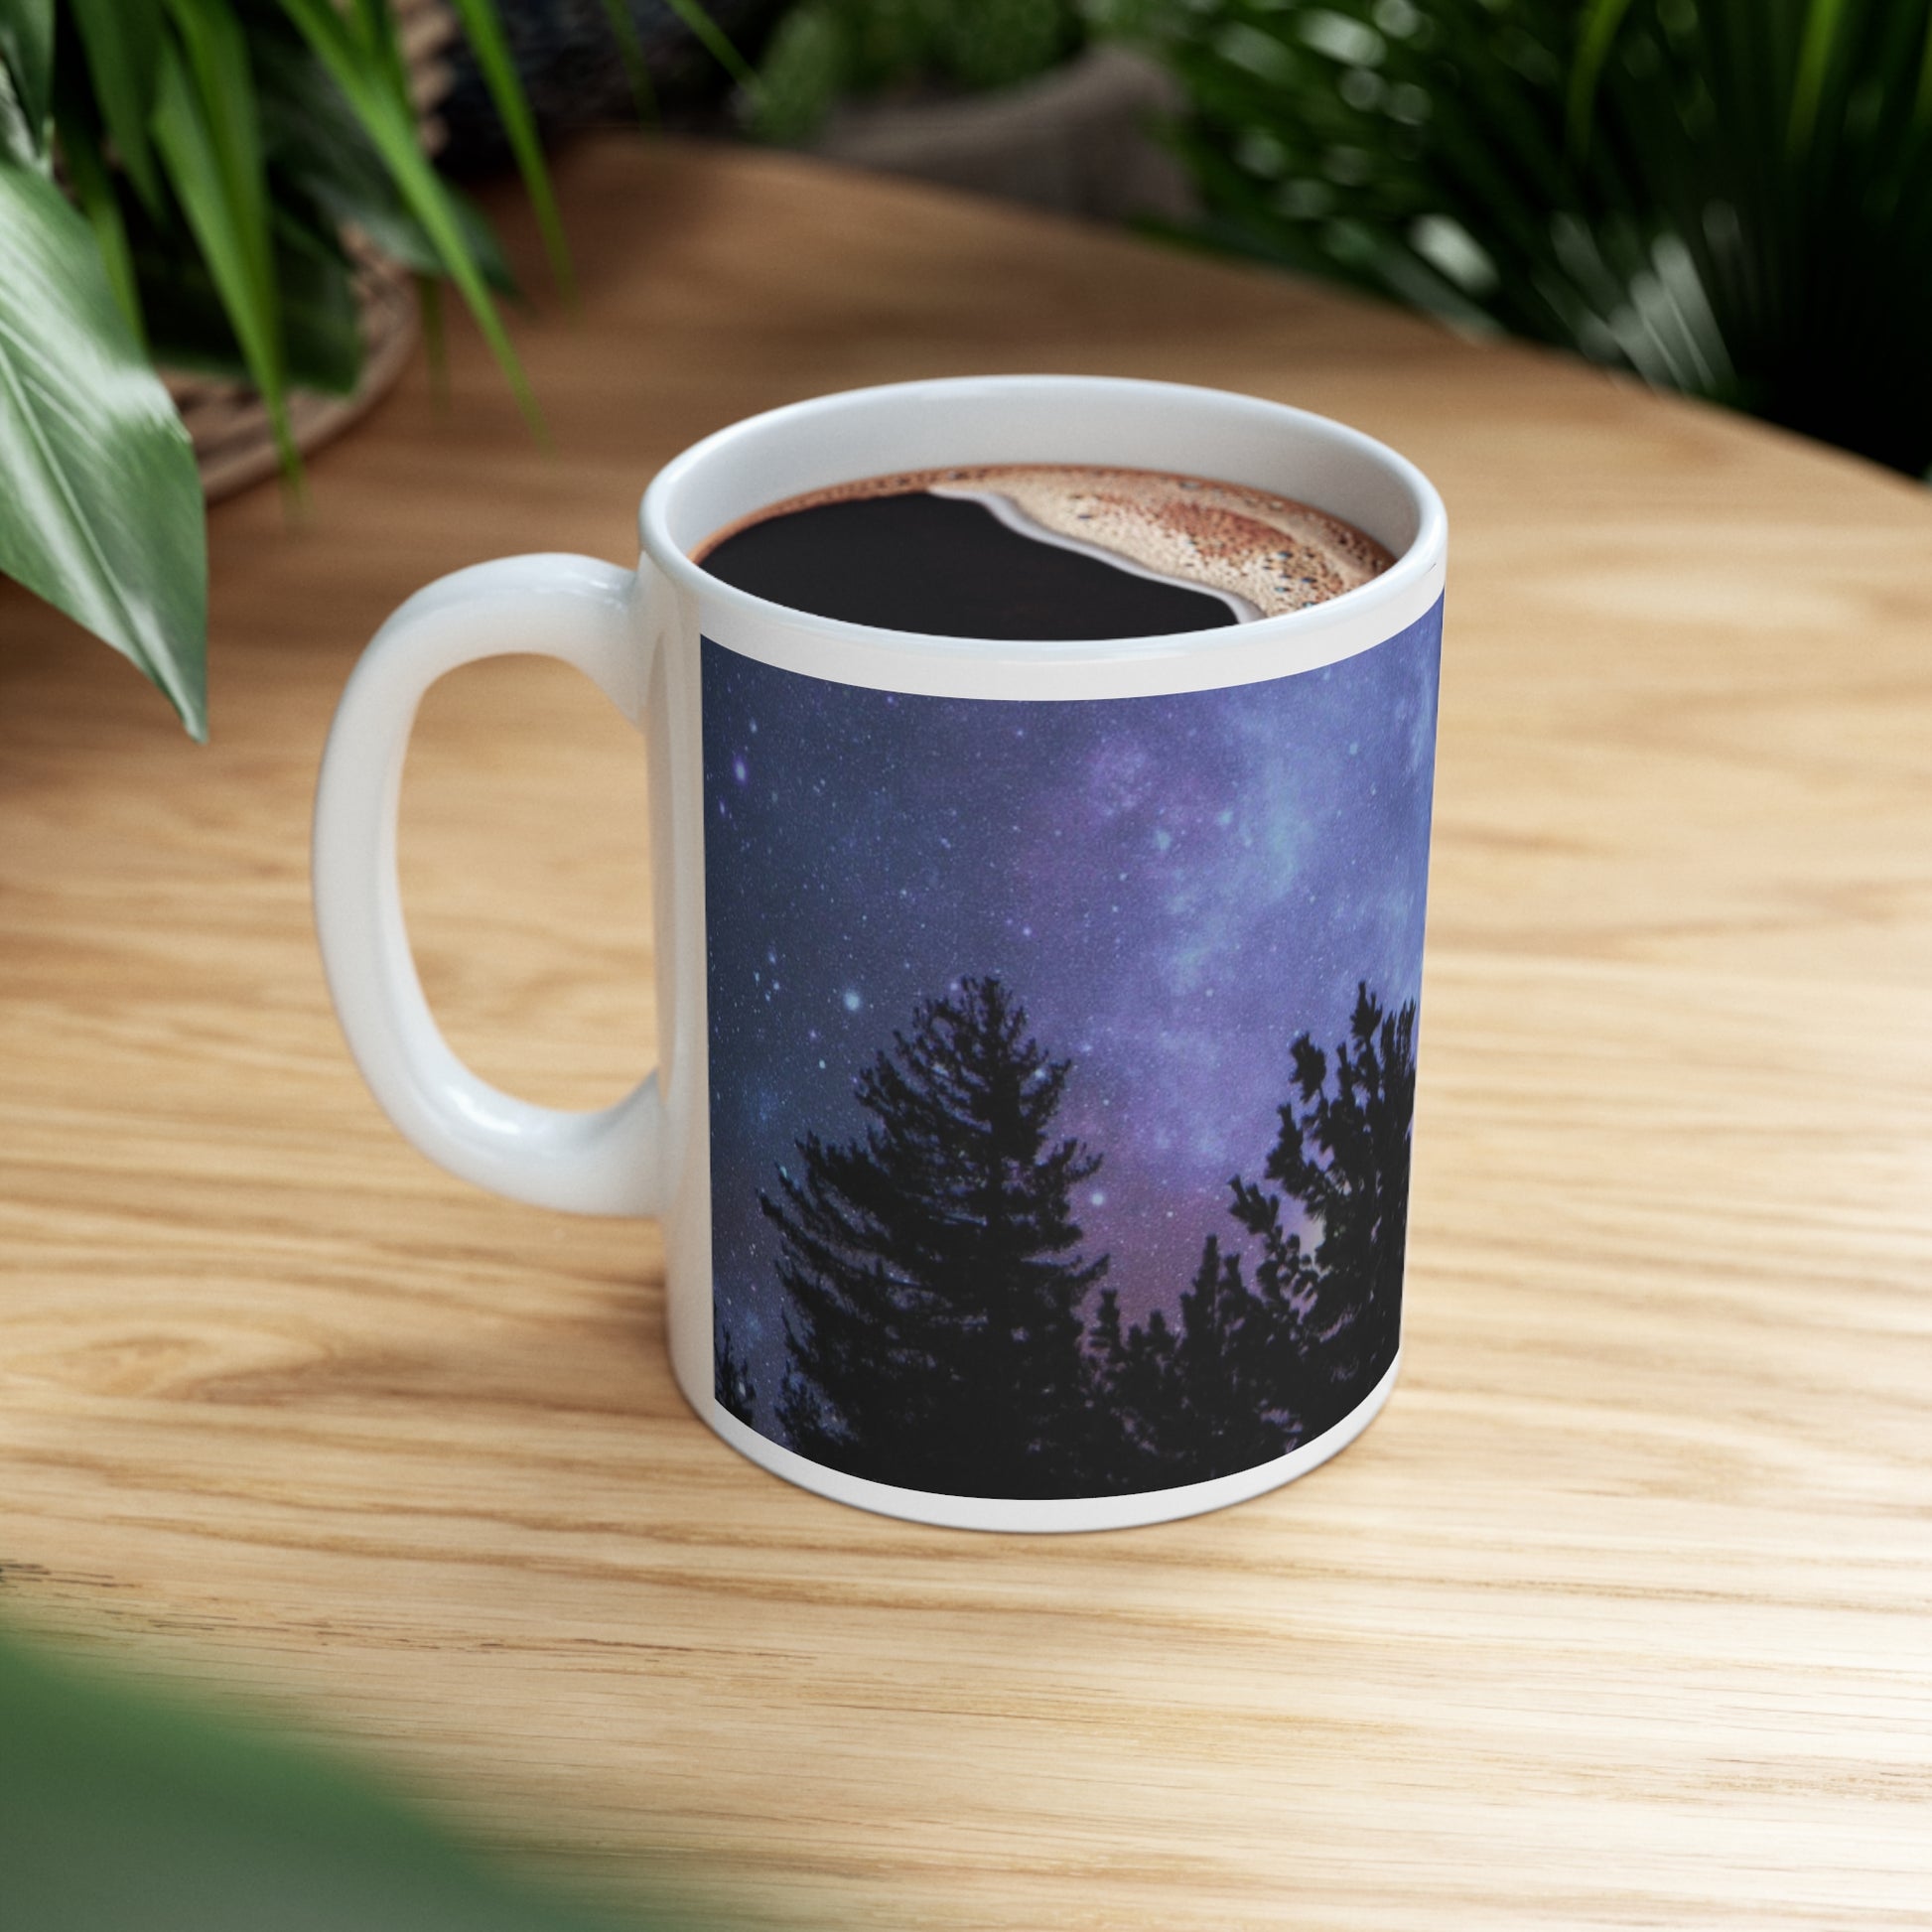 Mock up of the mug filled with a beverage sitting on a wood surface